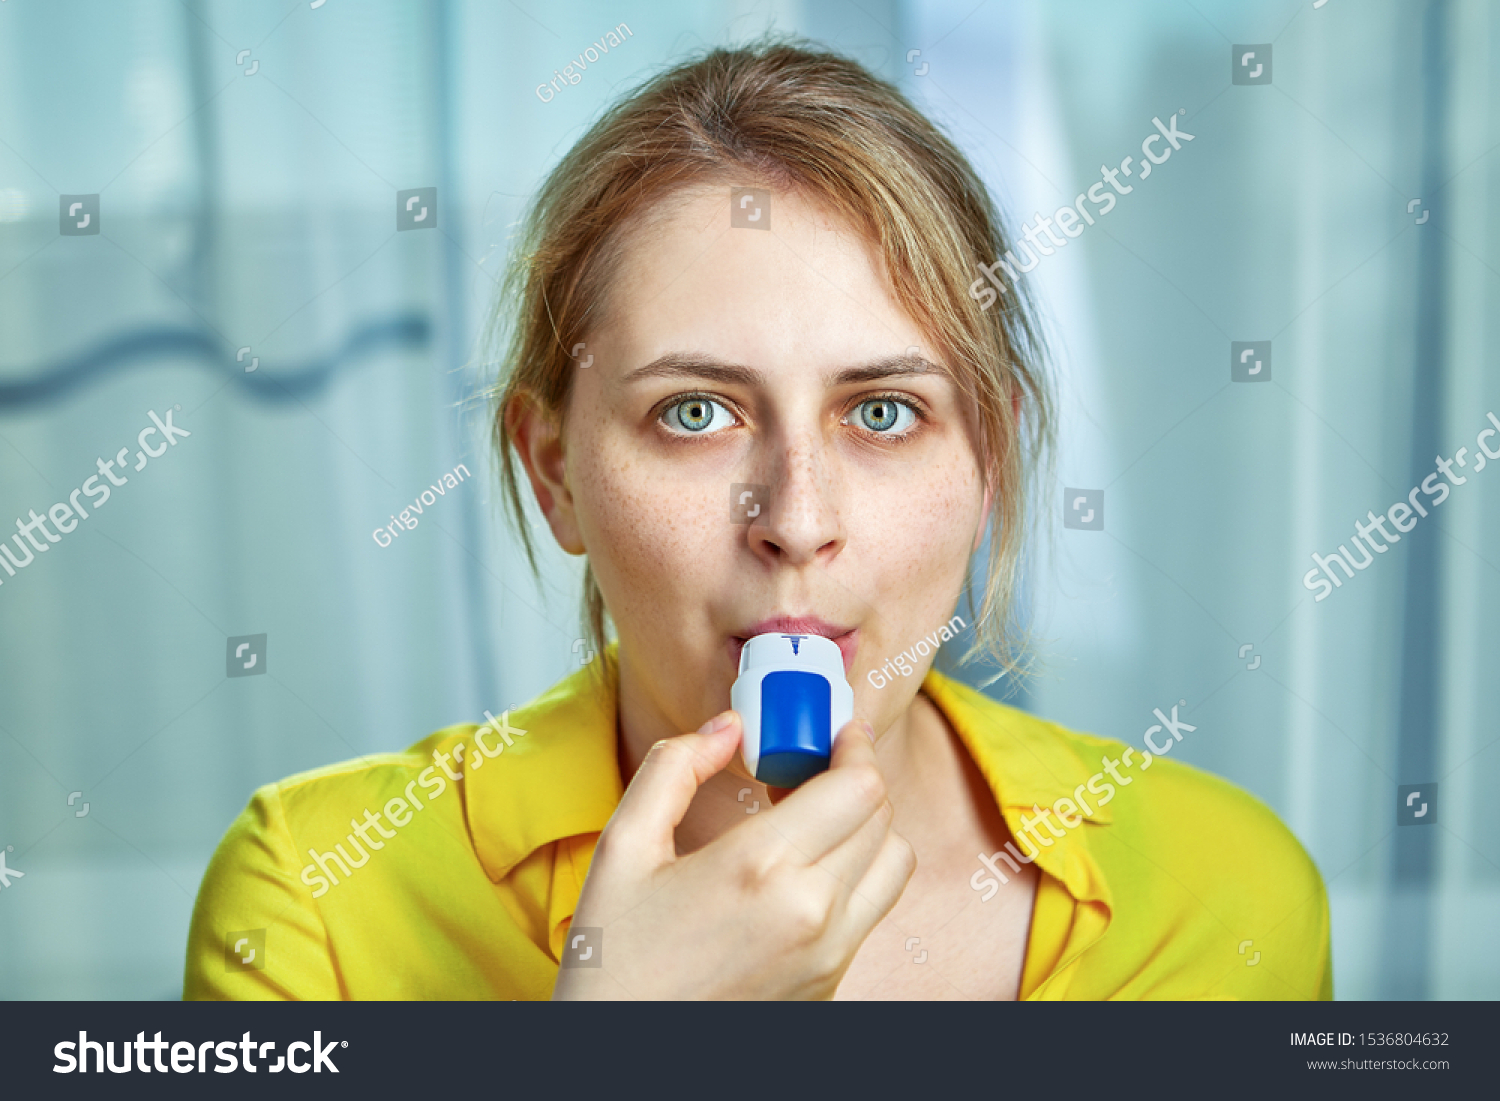 COPD or chronic obstructive pulmonary disease treatment with bronchodilator powder inhaler. A young woman uses dispenser with powders inhalation to relieve symptoms of asthma, and breathing relief.